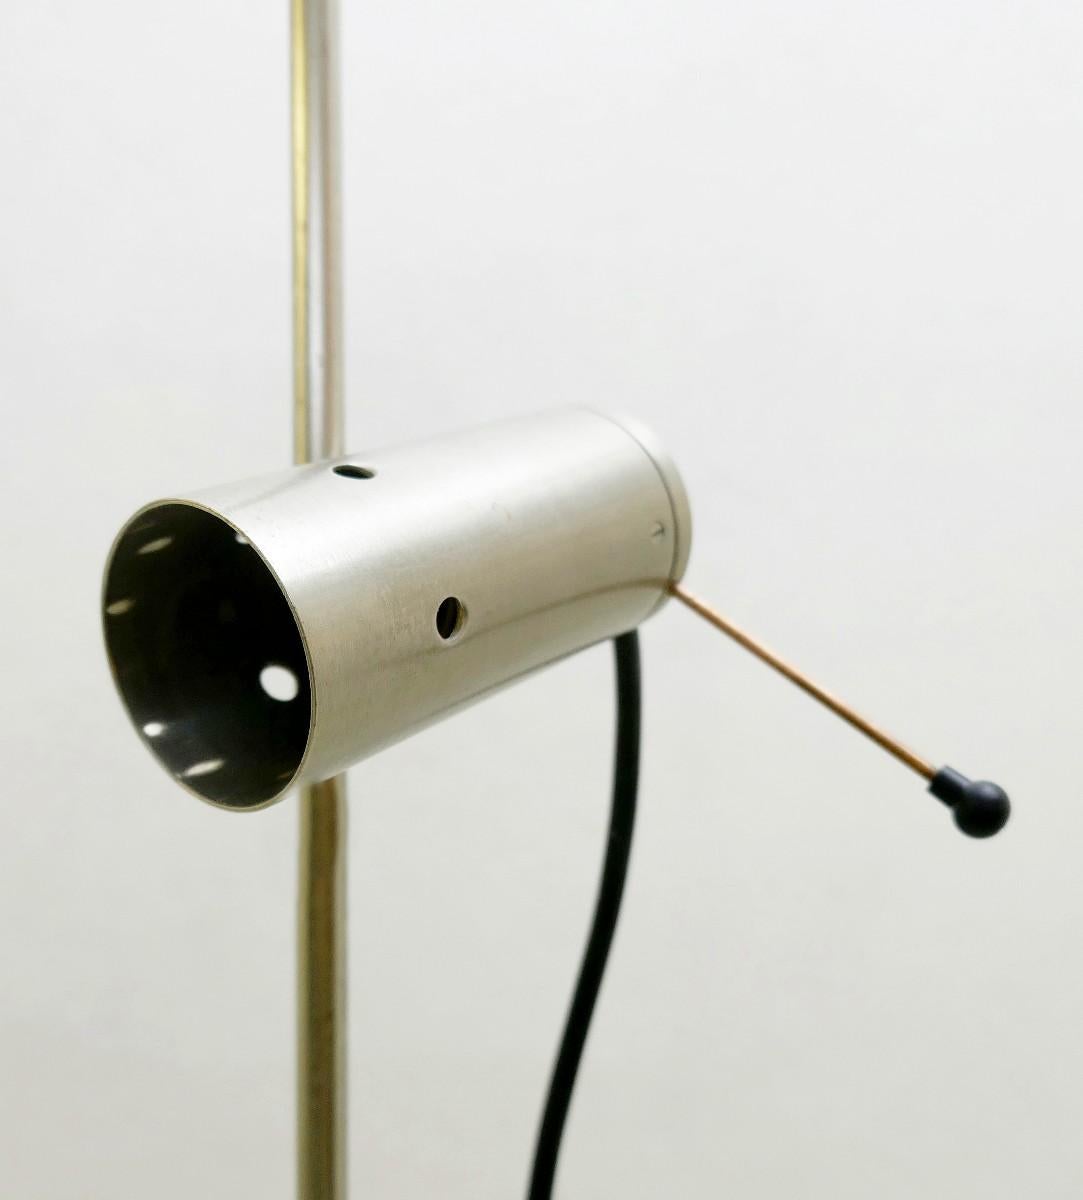 Floor lamp, model 387. Designed by Tito Agnoli for O'Luce, 1954. Two available.